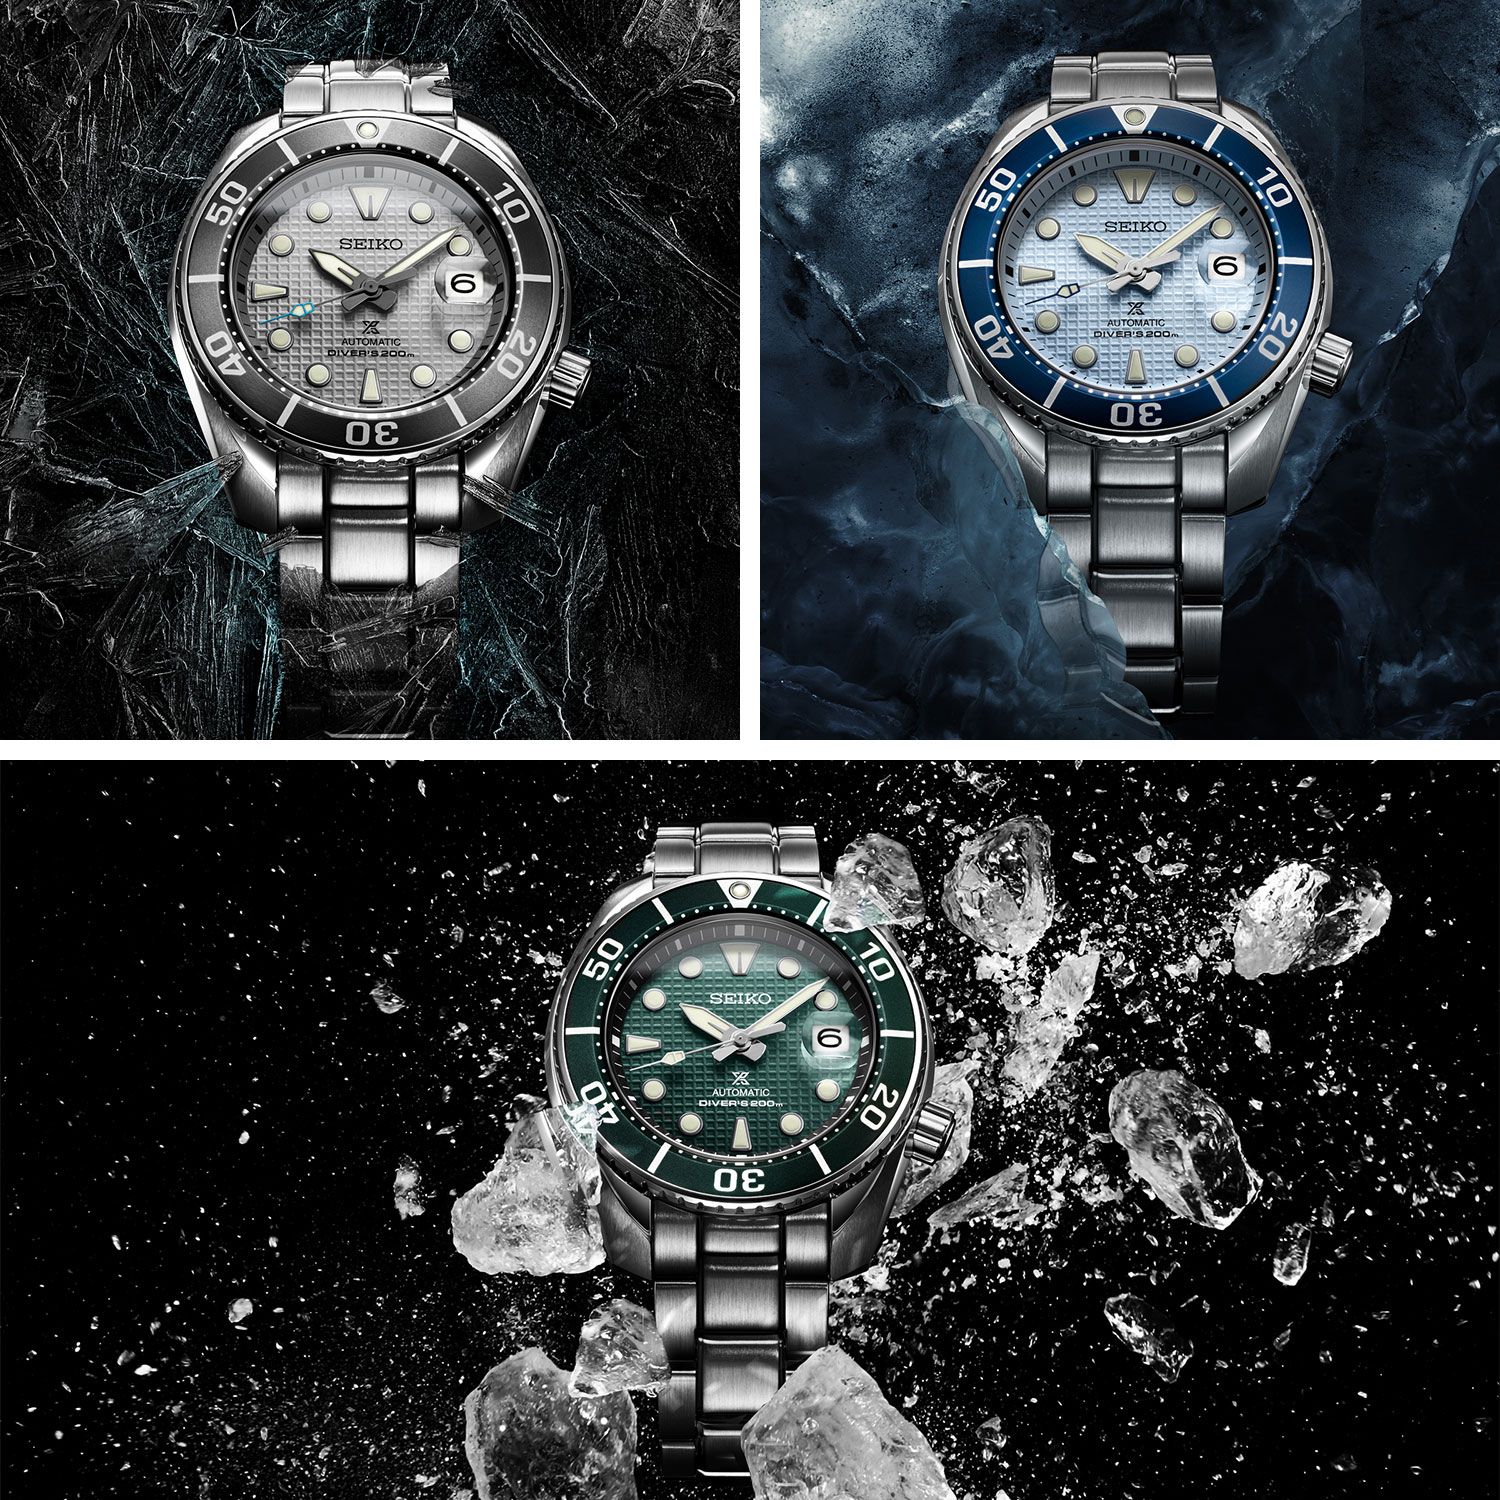 Seiko's New Prospex Watches Are Made for Ice Divers